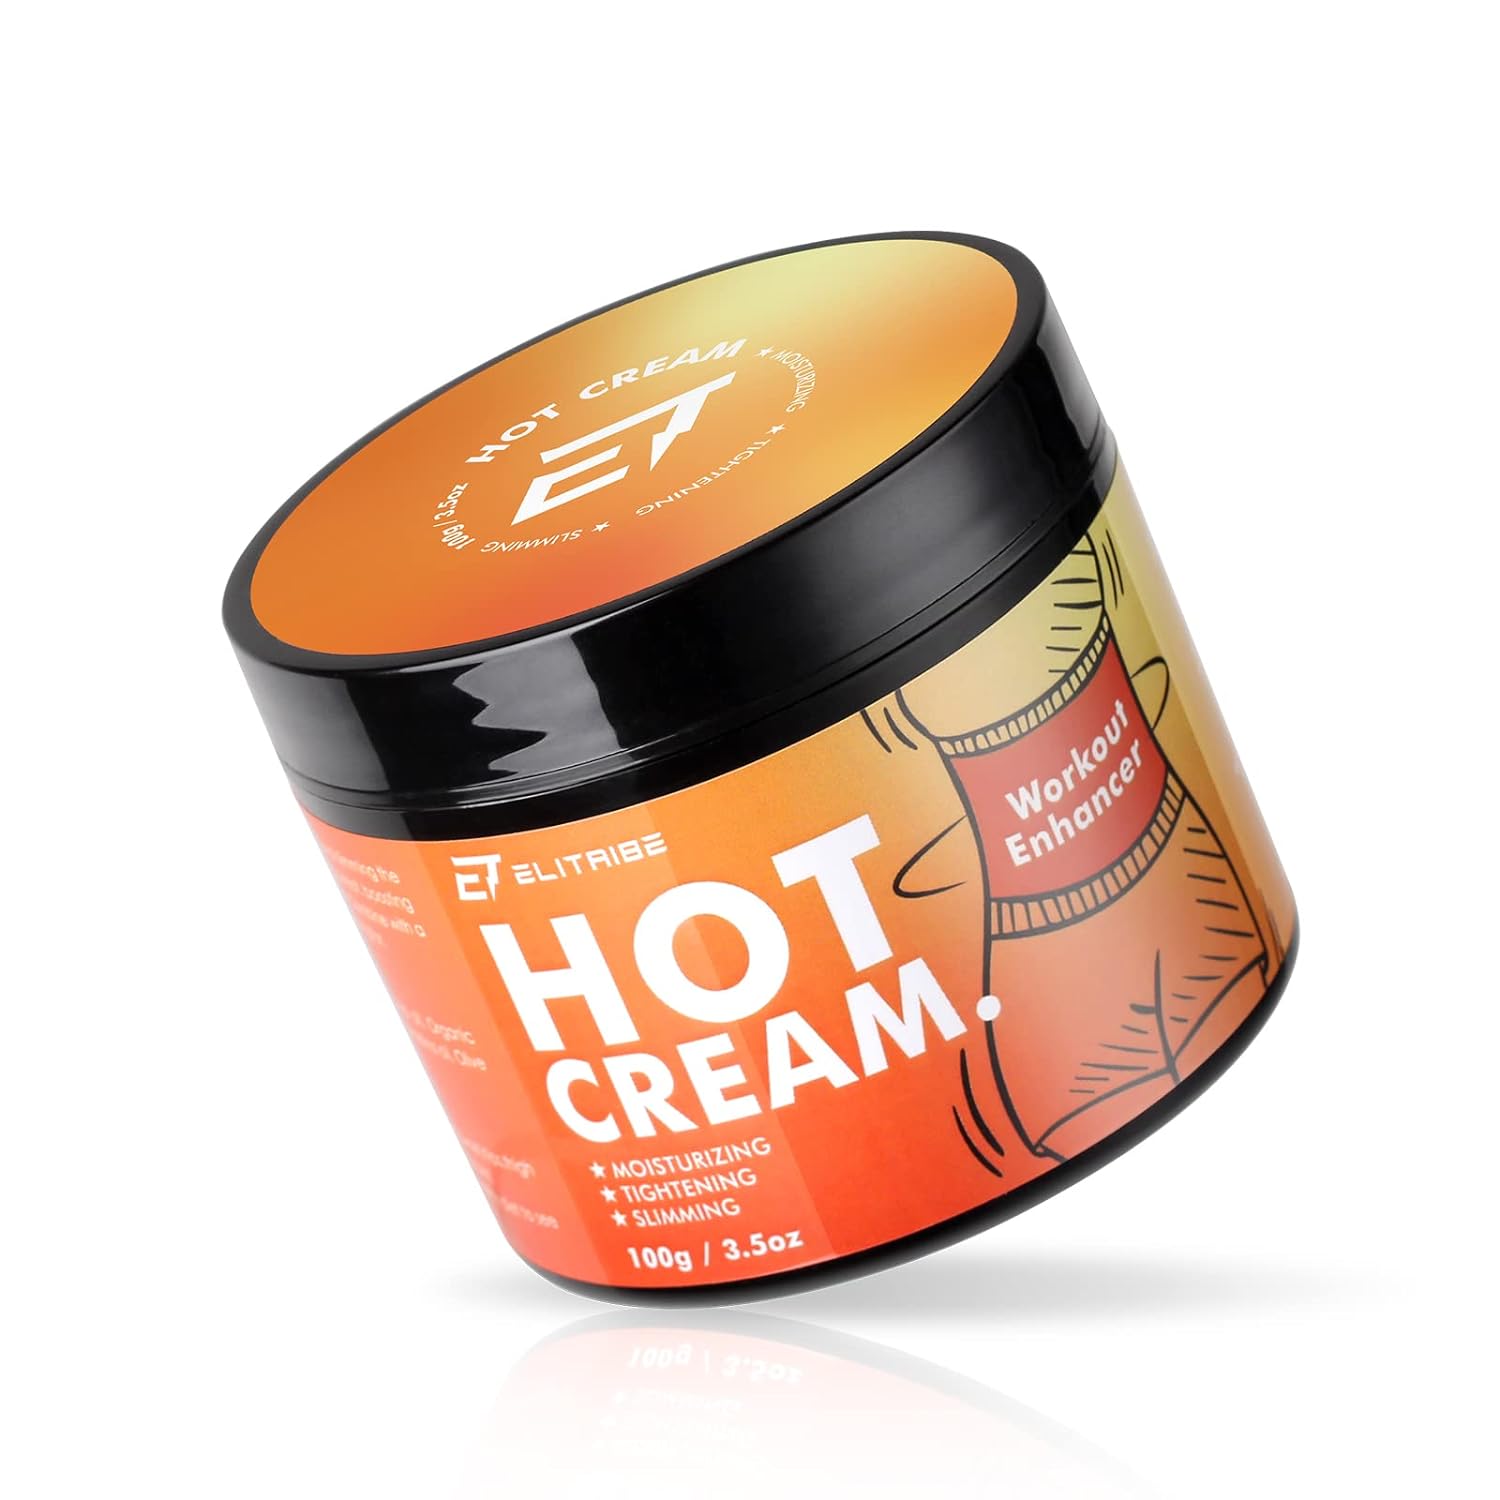 Hot Sweat Cream, Fat Burning Cream for Belly, Slim Shaping Workout